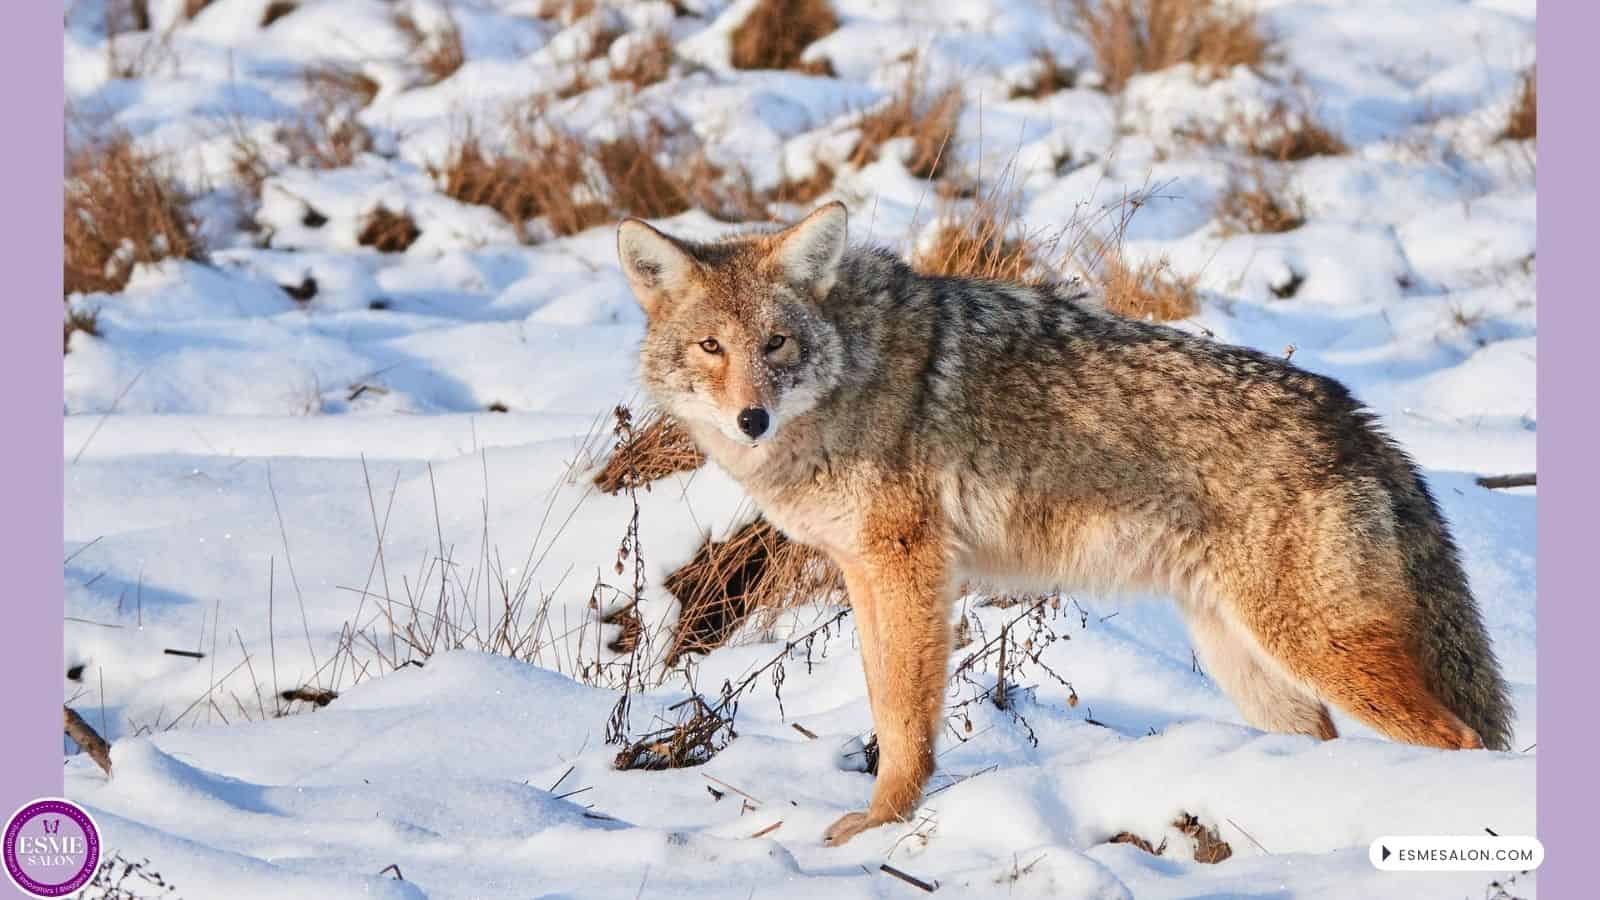 an image of a Coyote walking in the snow